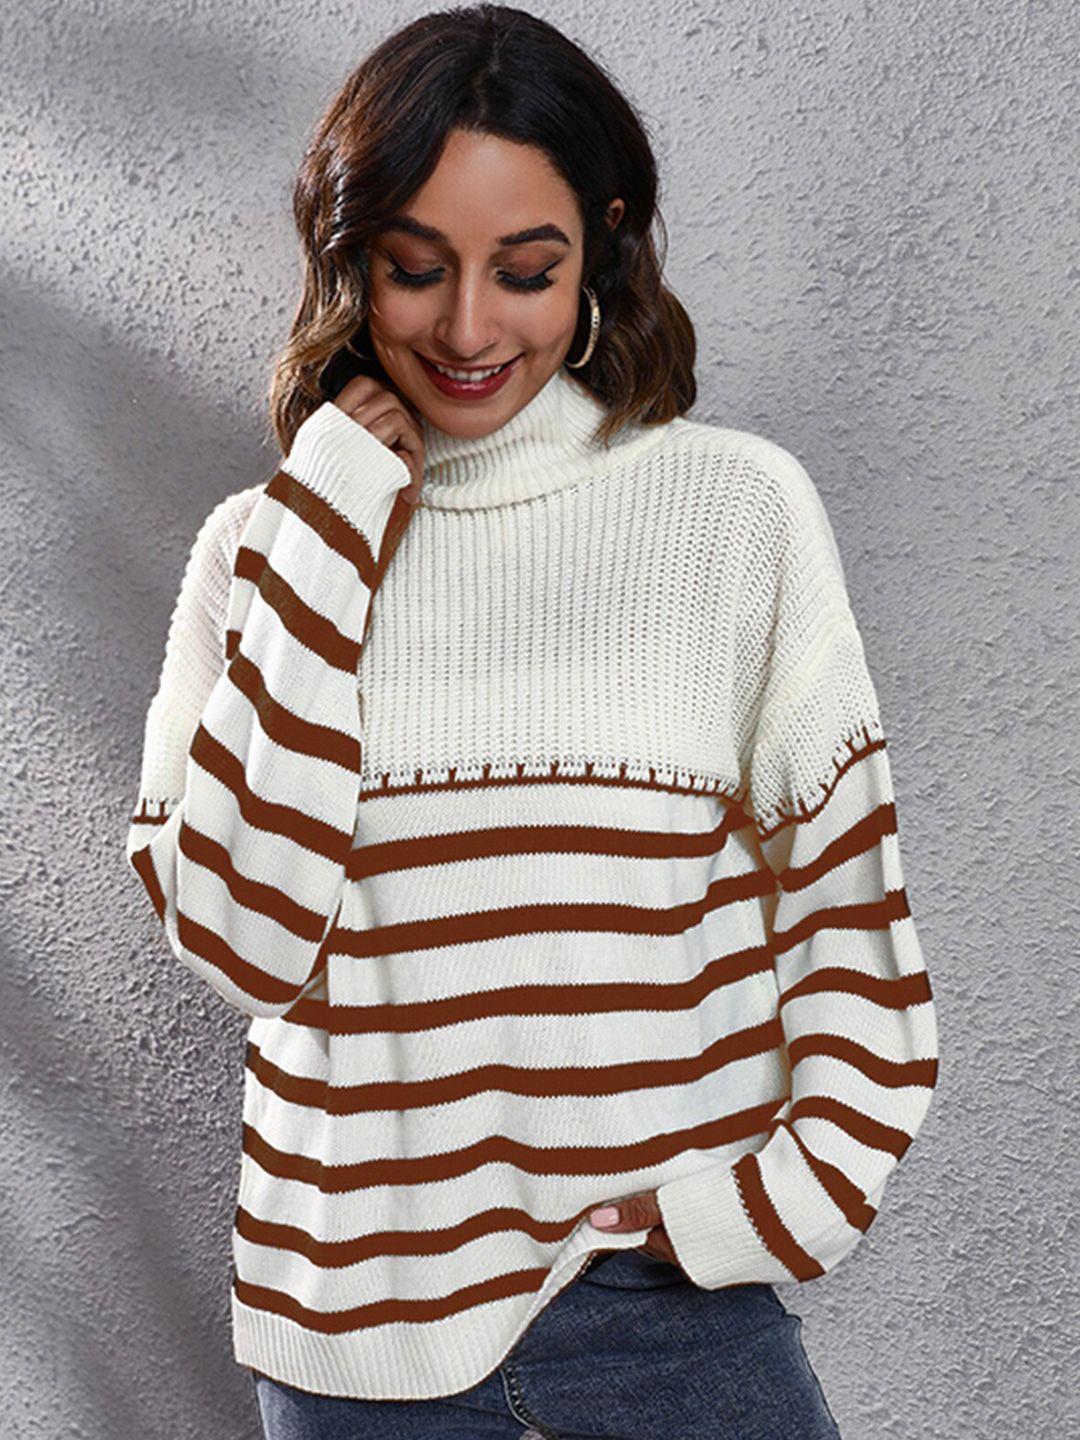 stylecast women brown & white striped acrylic pullover